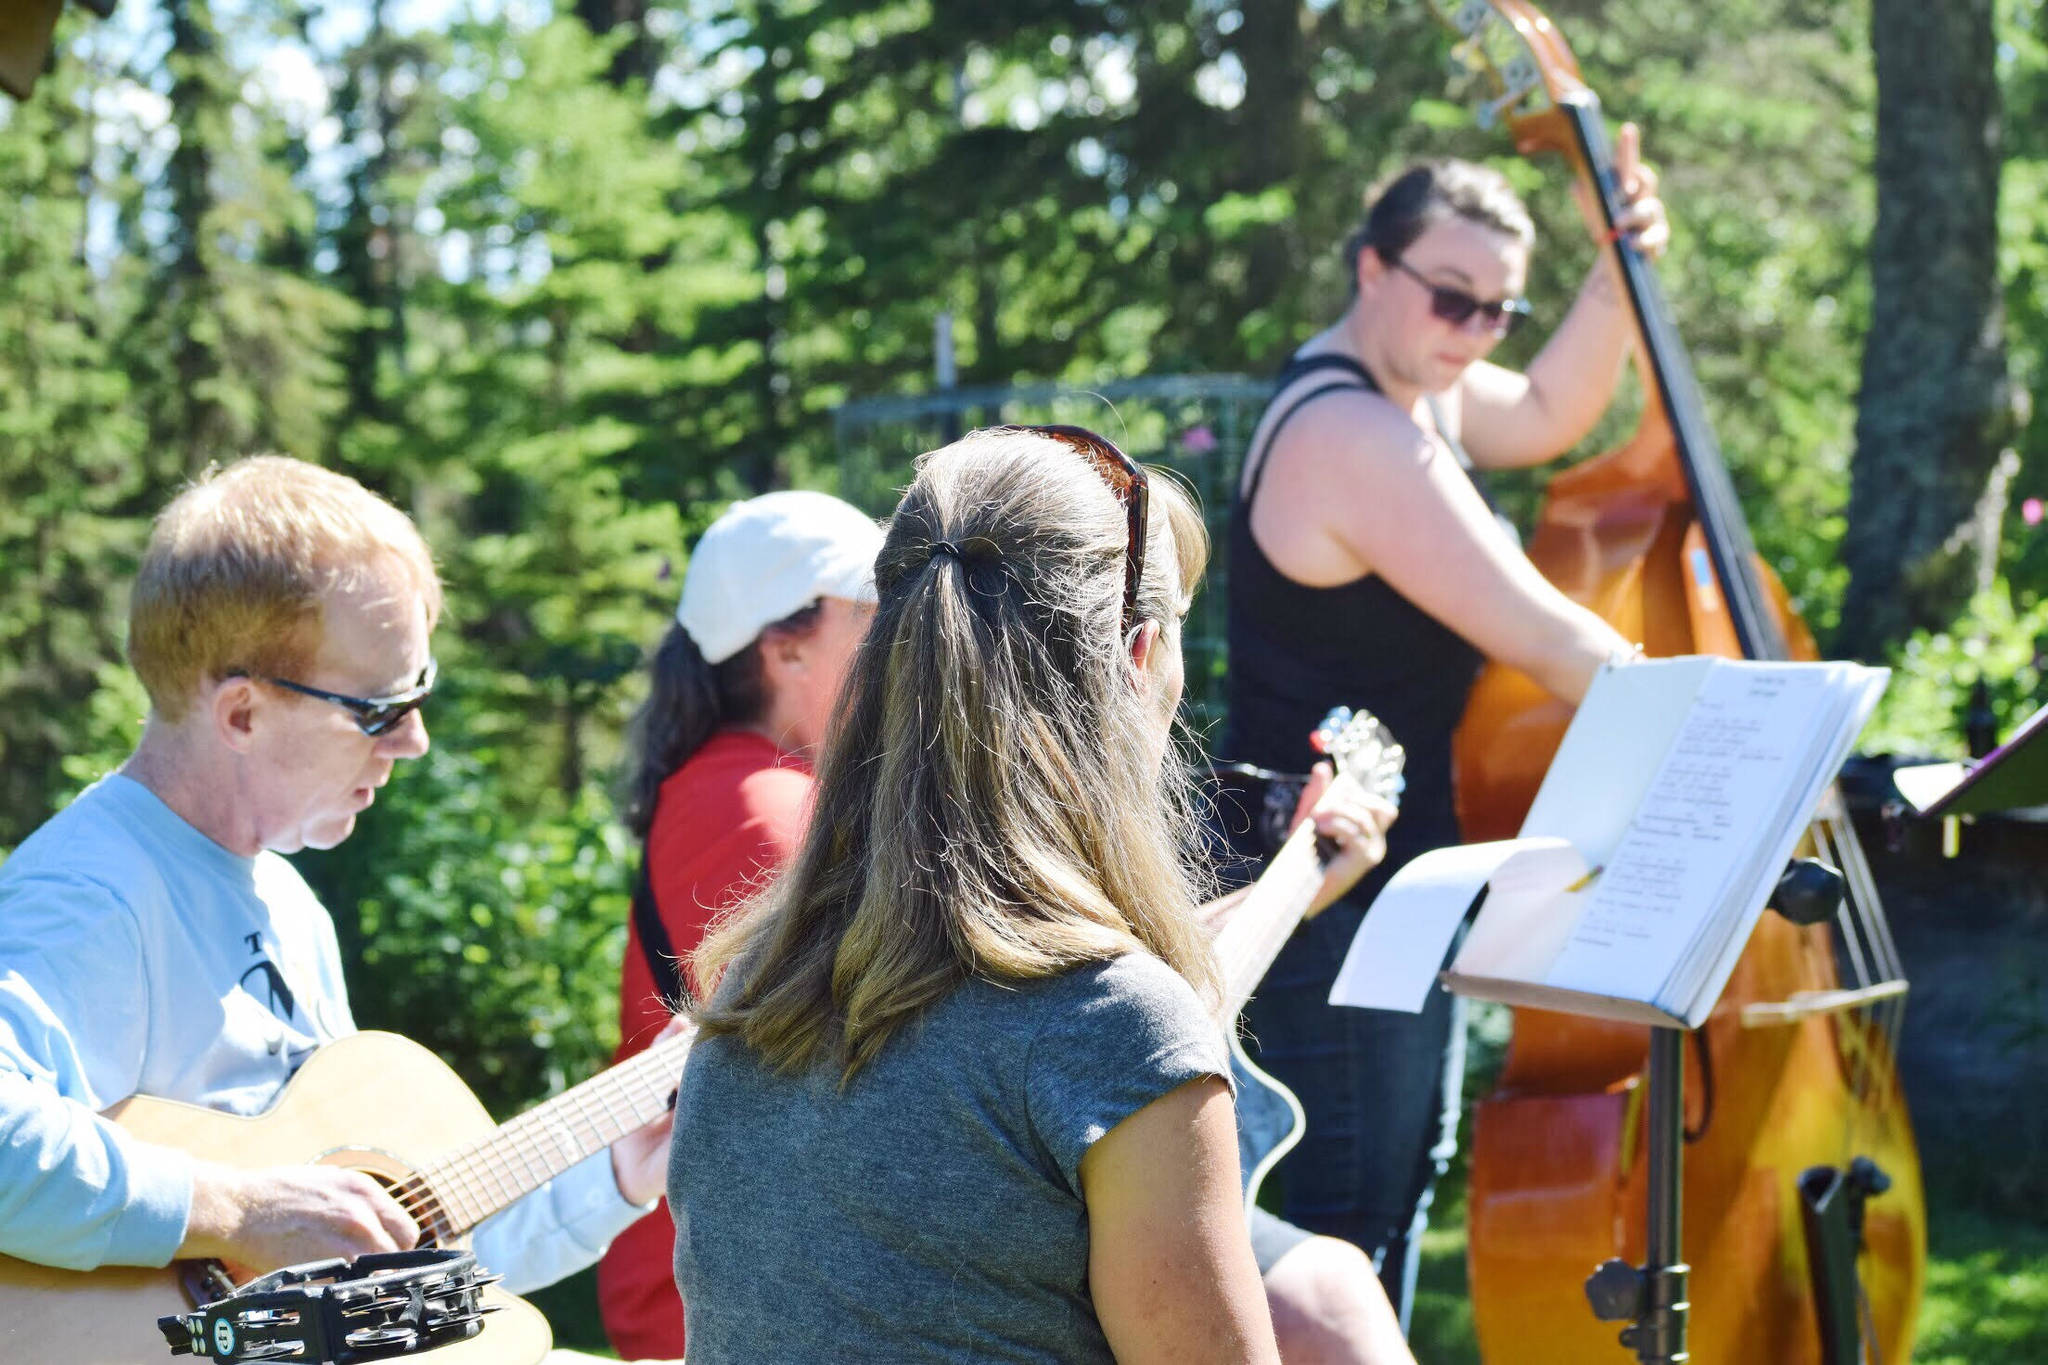 Out of class, but not off duty: Local teachers come together to make music